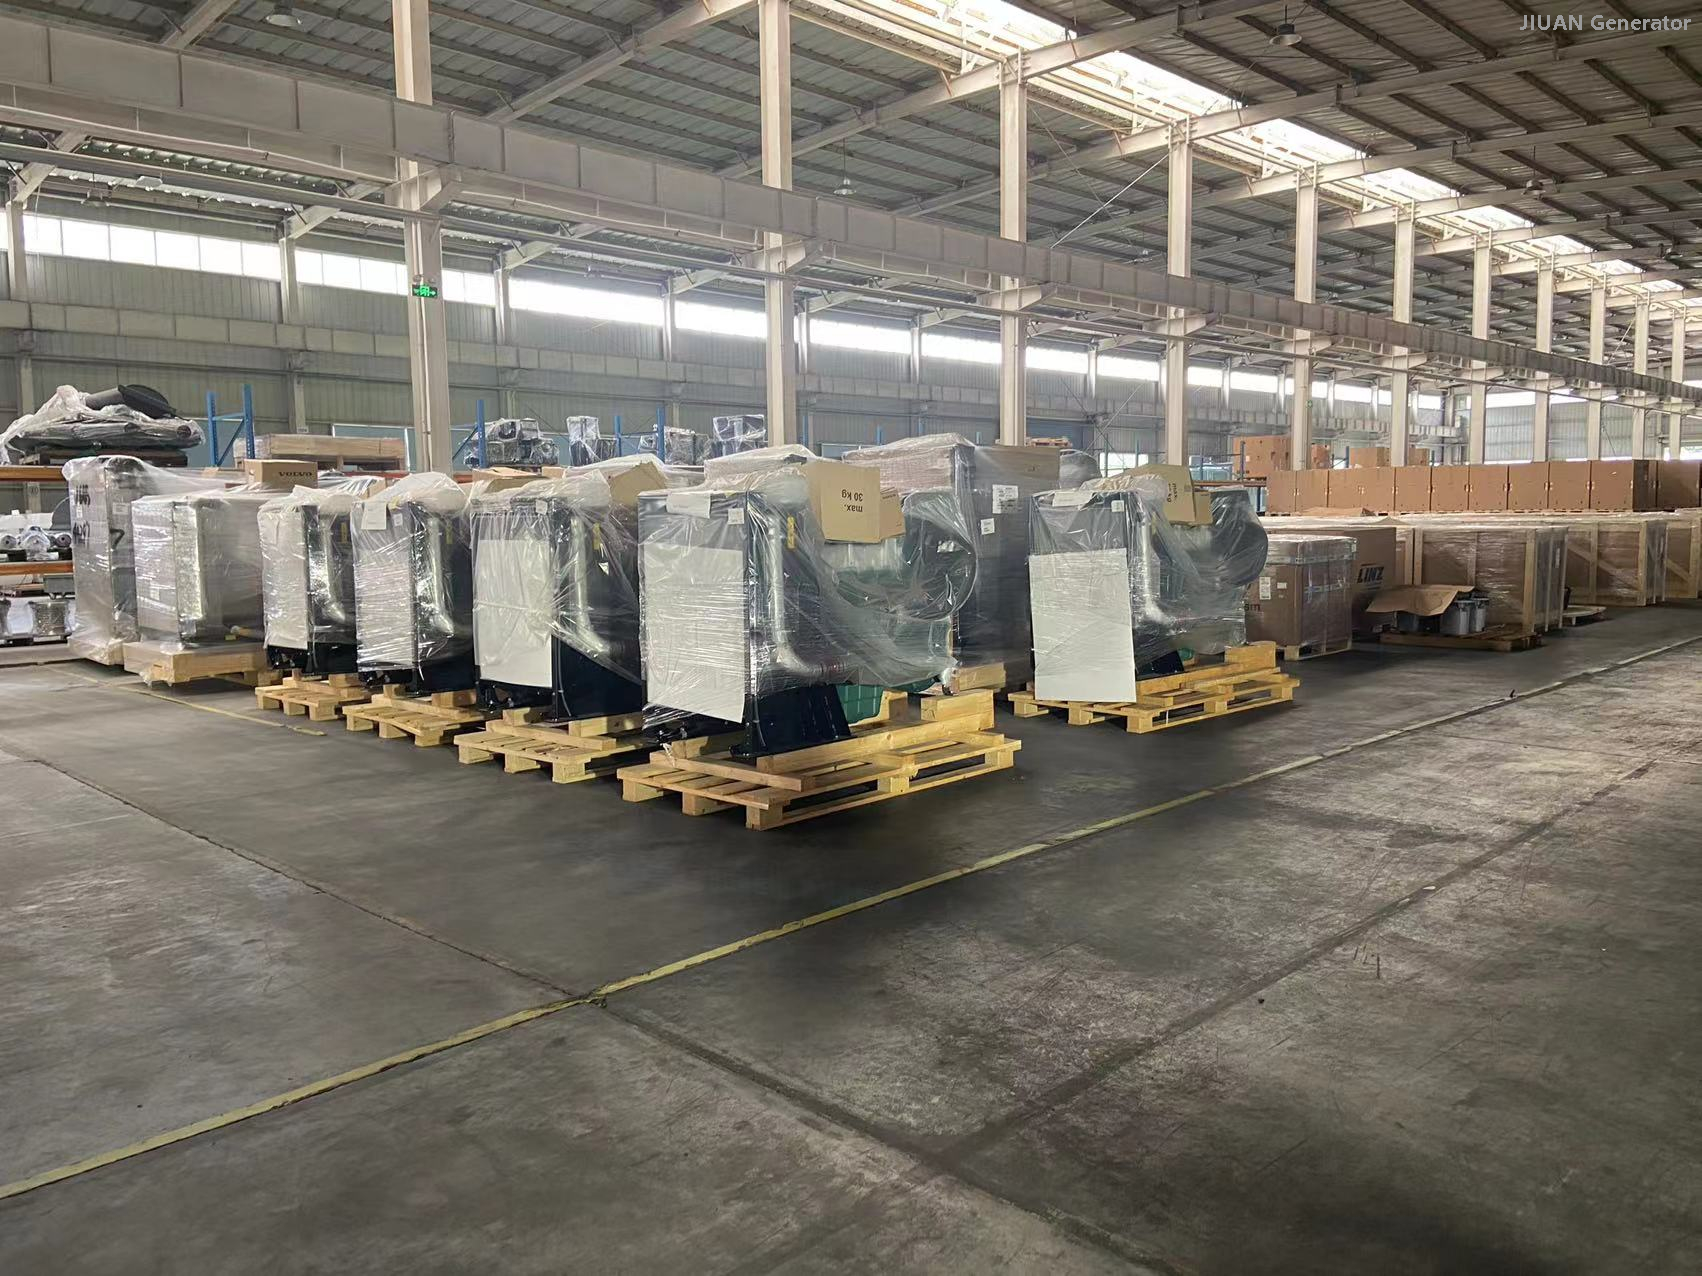 4006-23TAG2A 750KVA 600KW powered by PERKINS engine diesel electrical power industrial generator Guangzhou